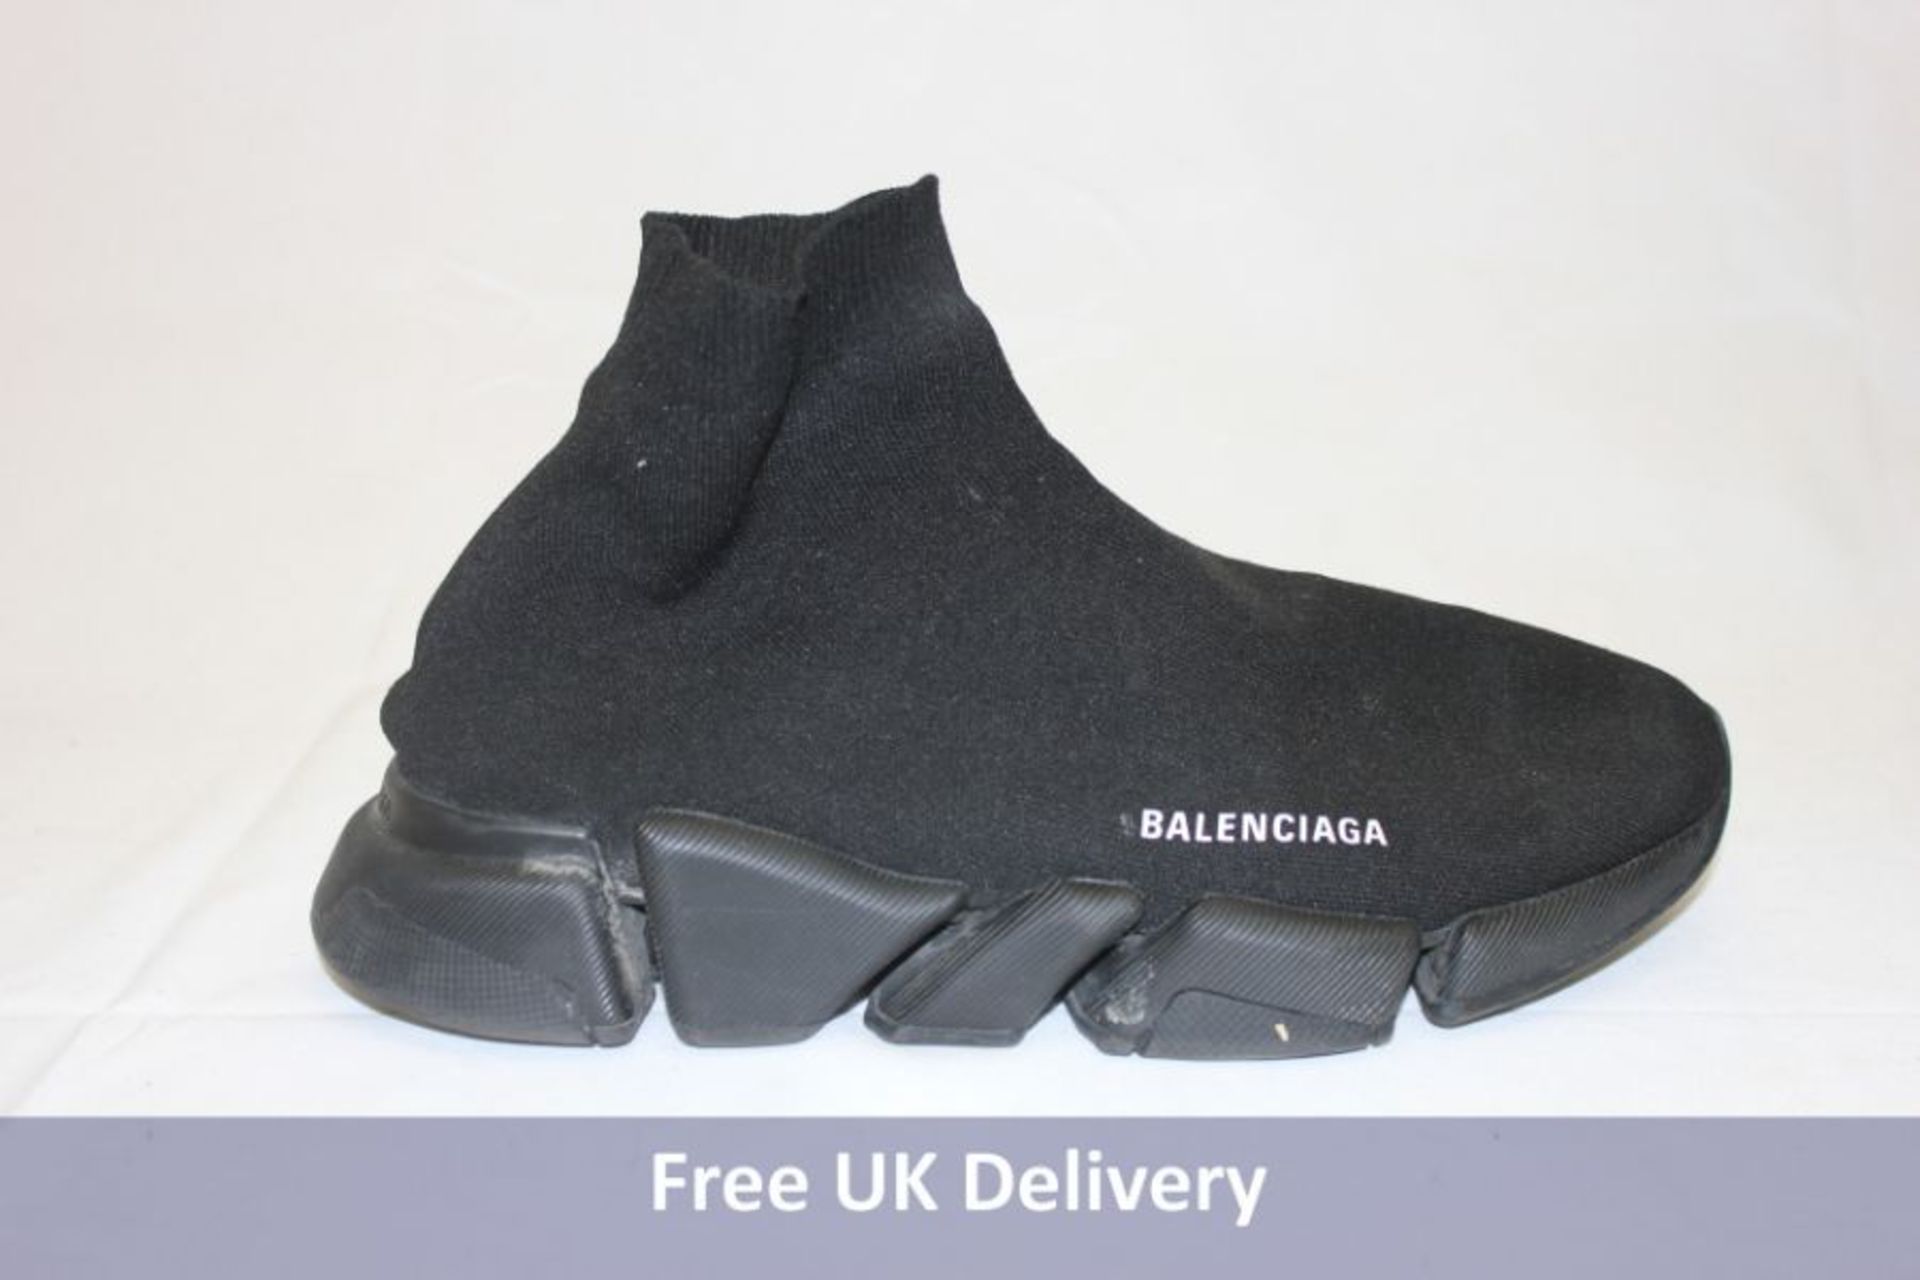 Balenciaga Speed 2.0 Trainers, Monochrome Black, UK 9. Used, No Box, Light signs of wearing